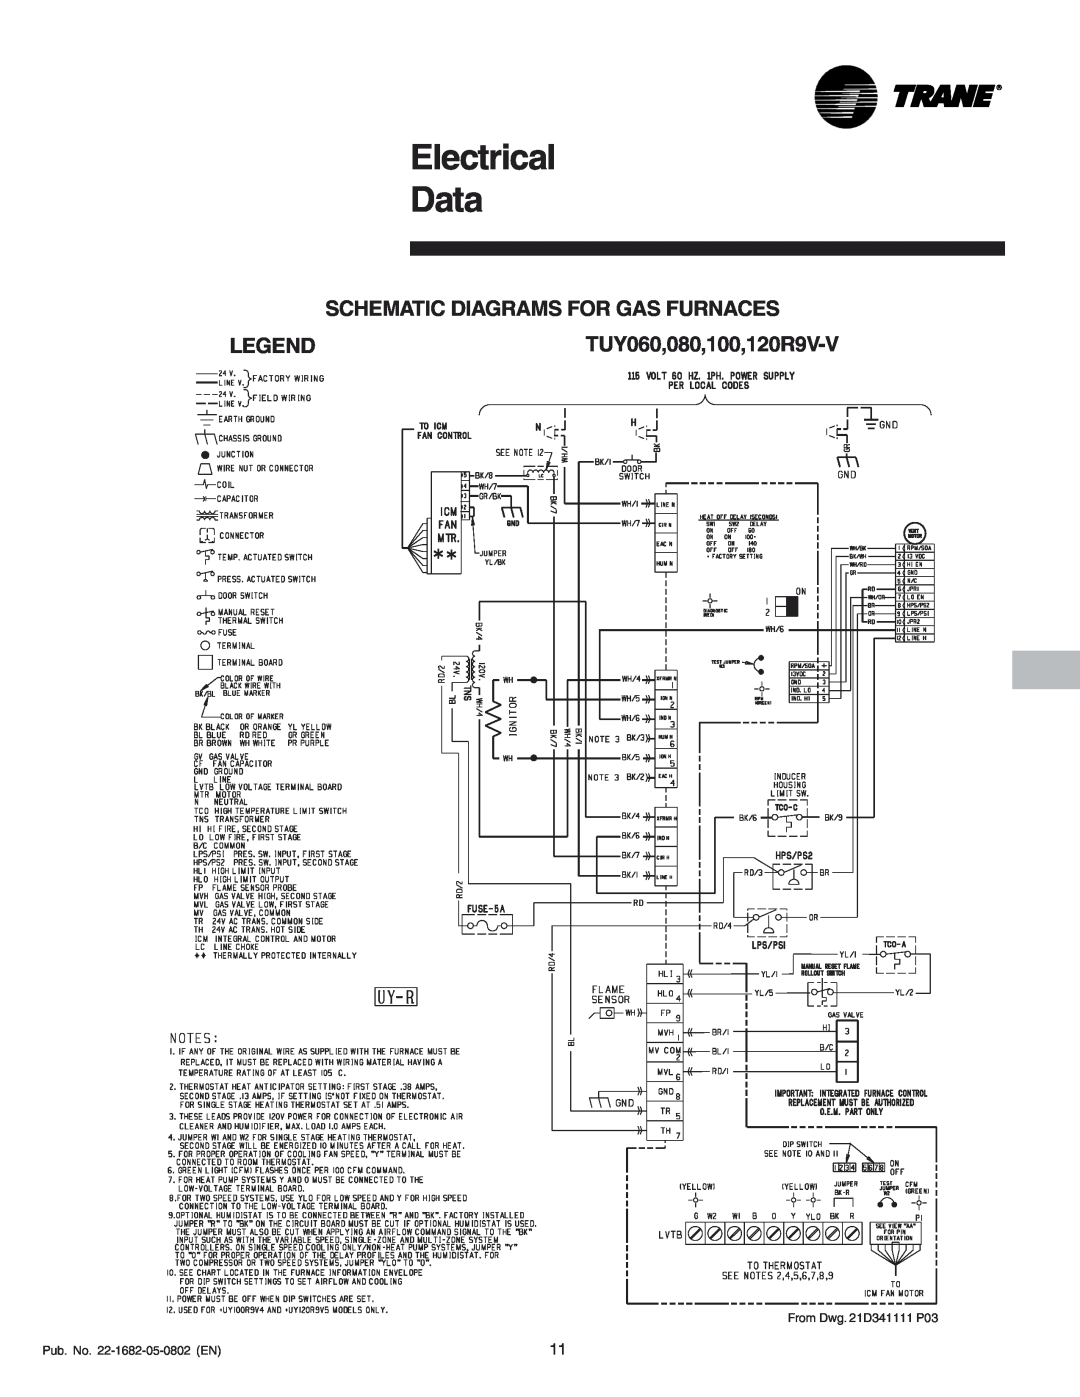 Trane XV 90 manual Electrical Data, Schematic Diagrams For Gas Furnaces, TUY060,080,100,120R9V-V 